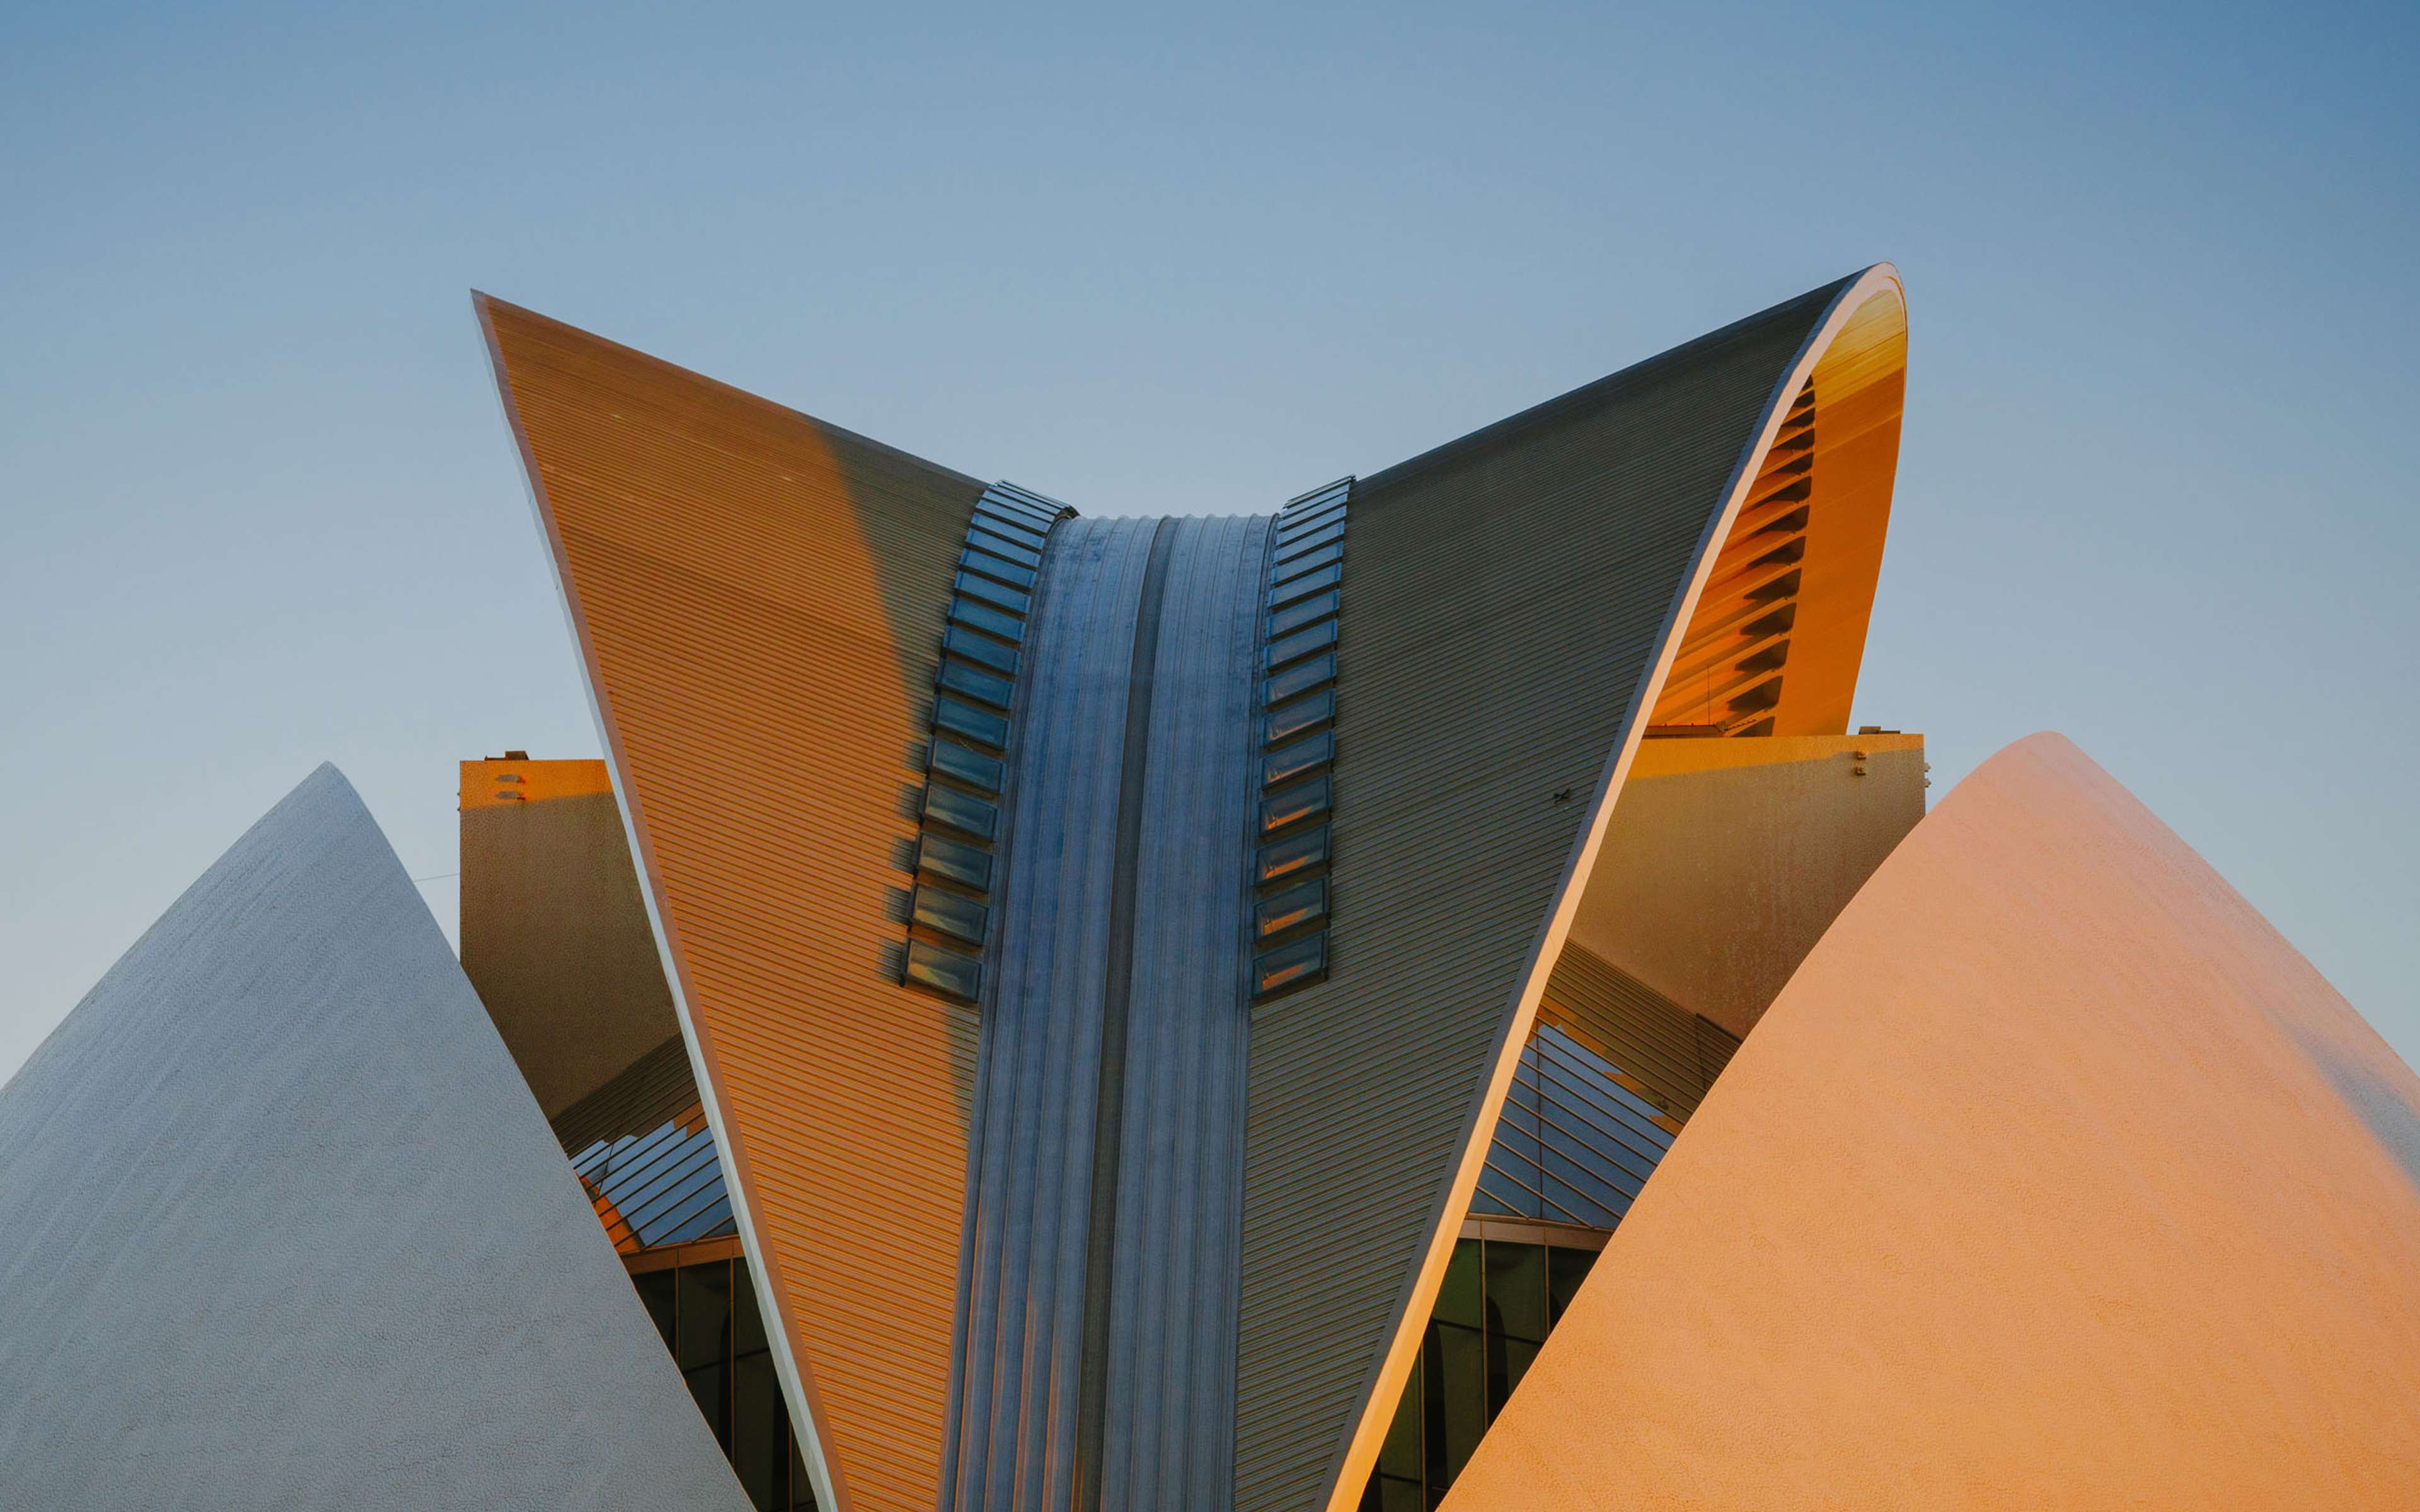 The Valencia City of Arts and Sciences at sunset.